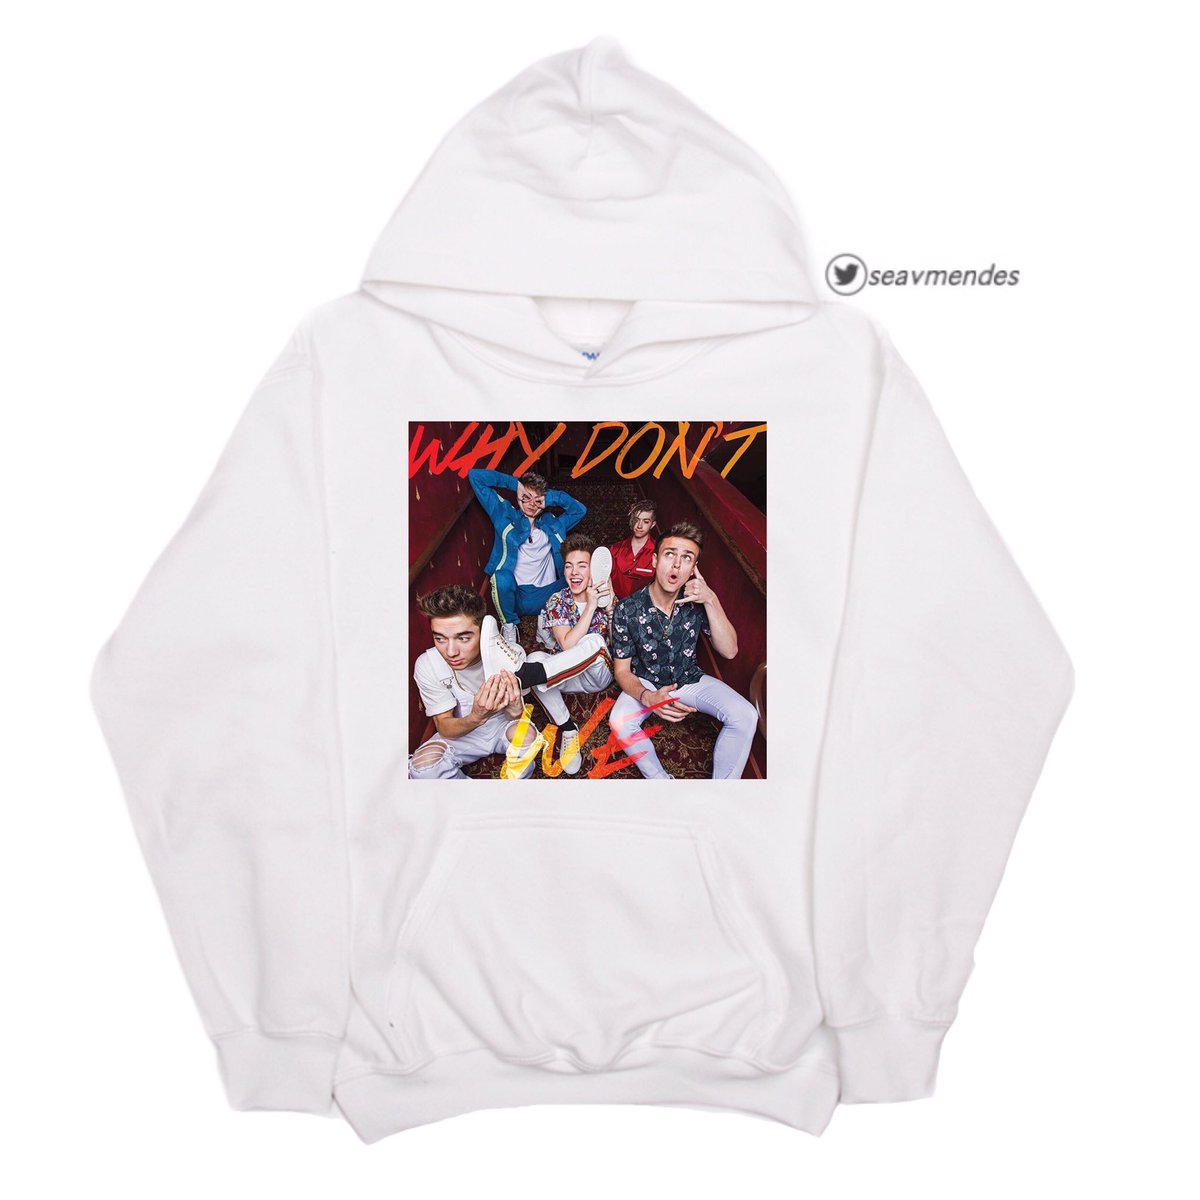 why don’t we graphic hoodies